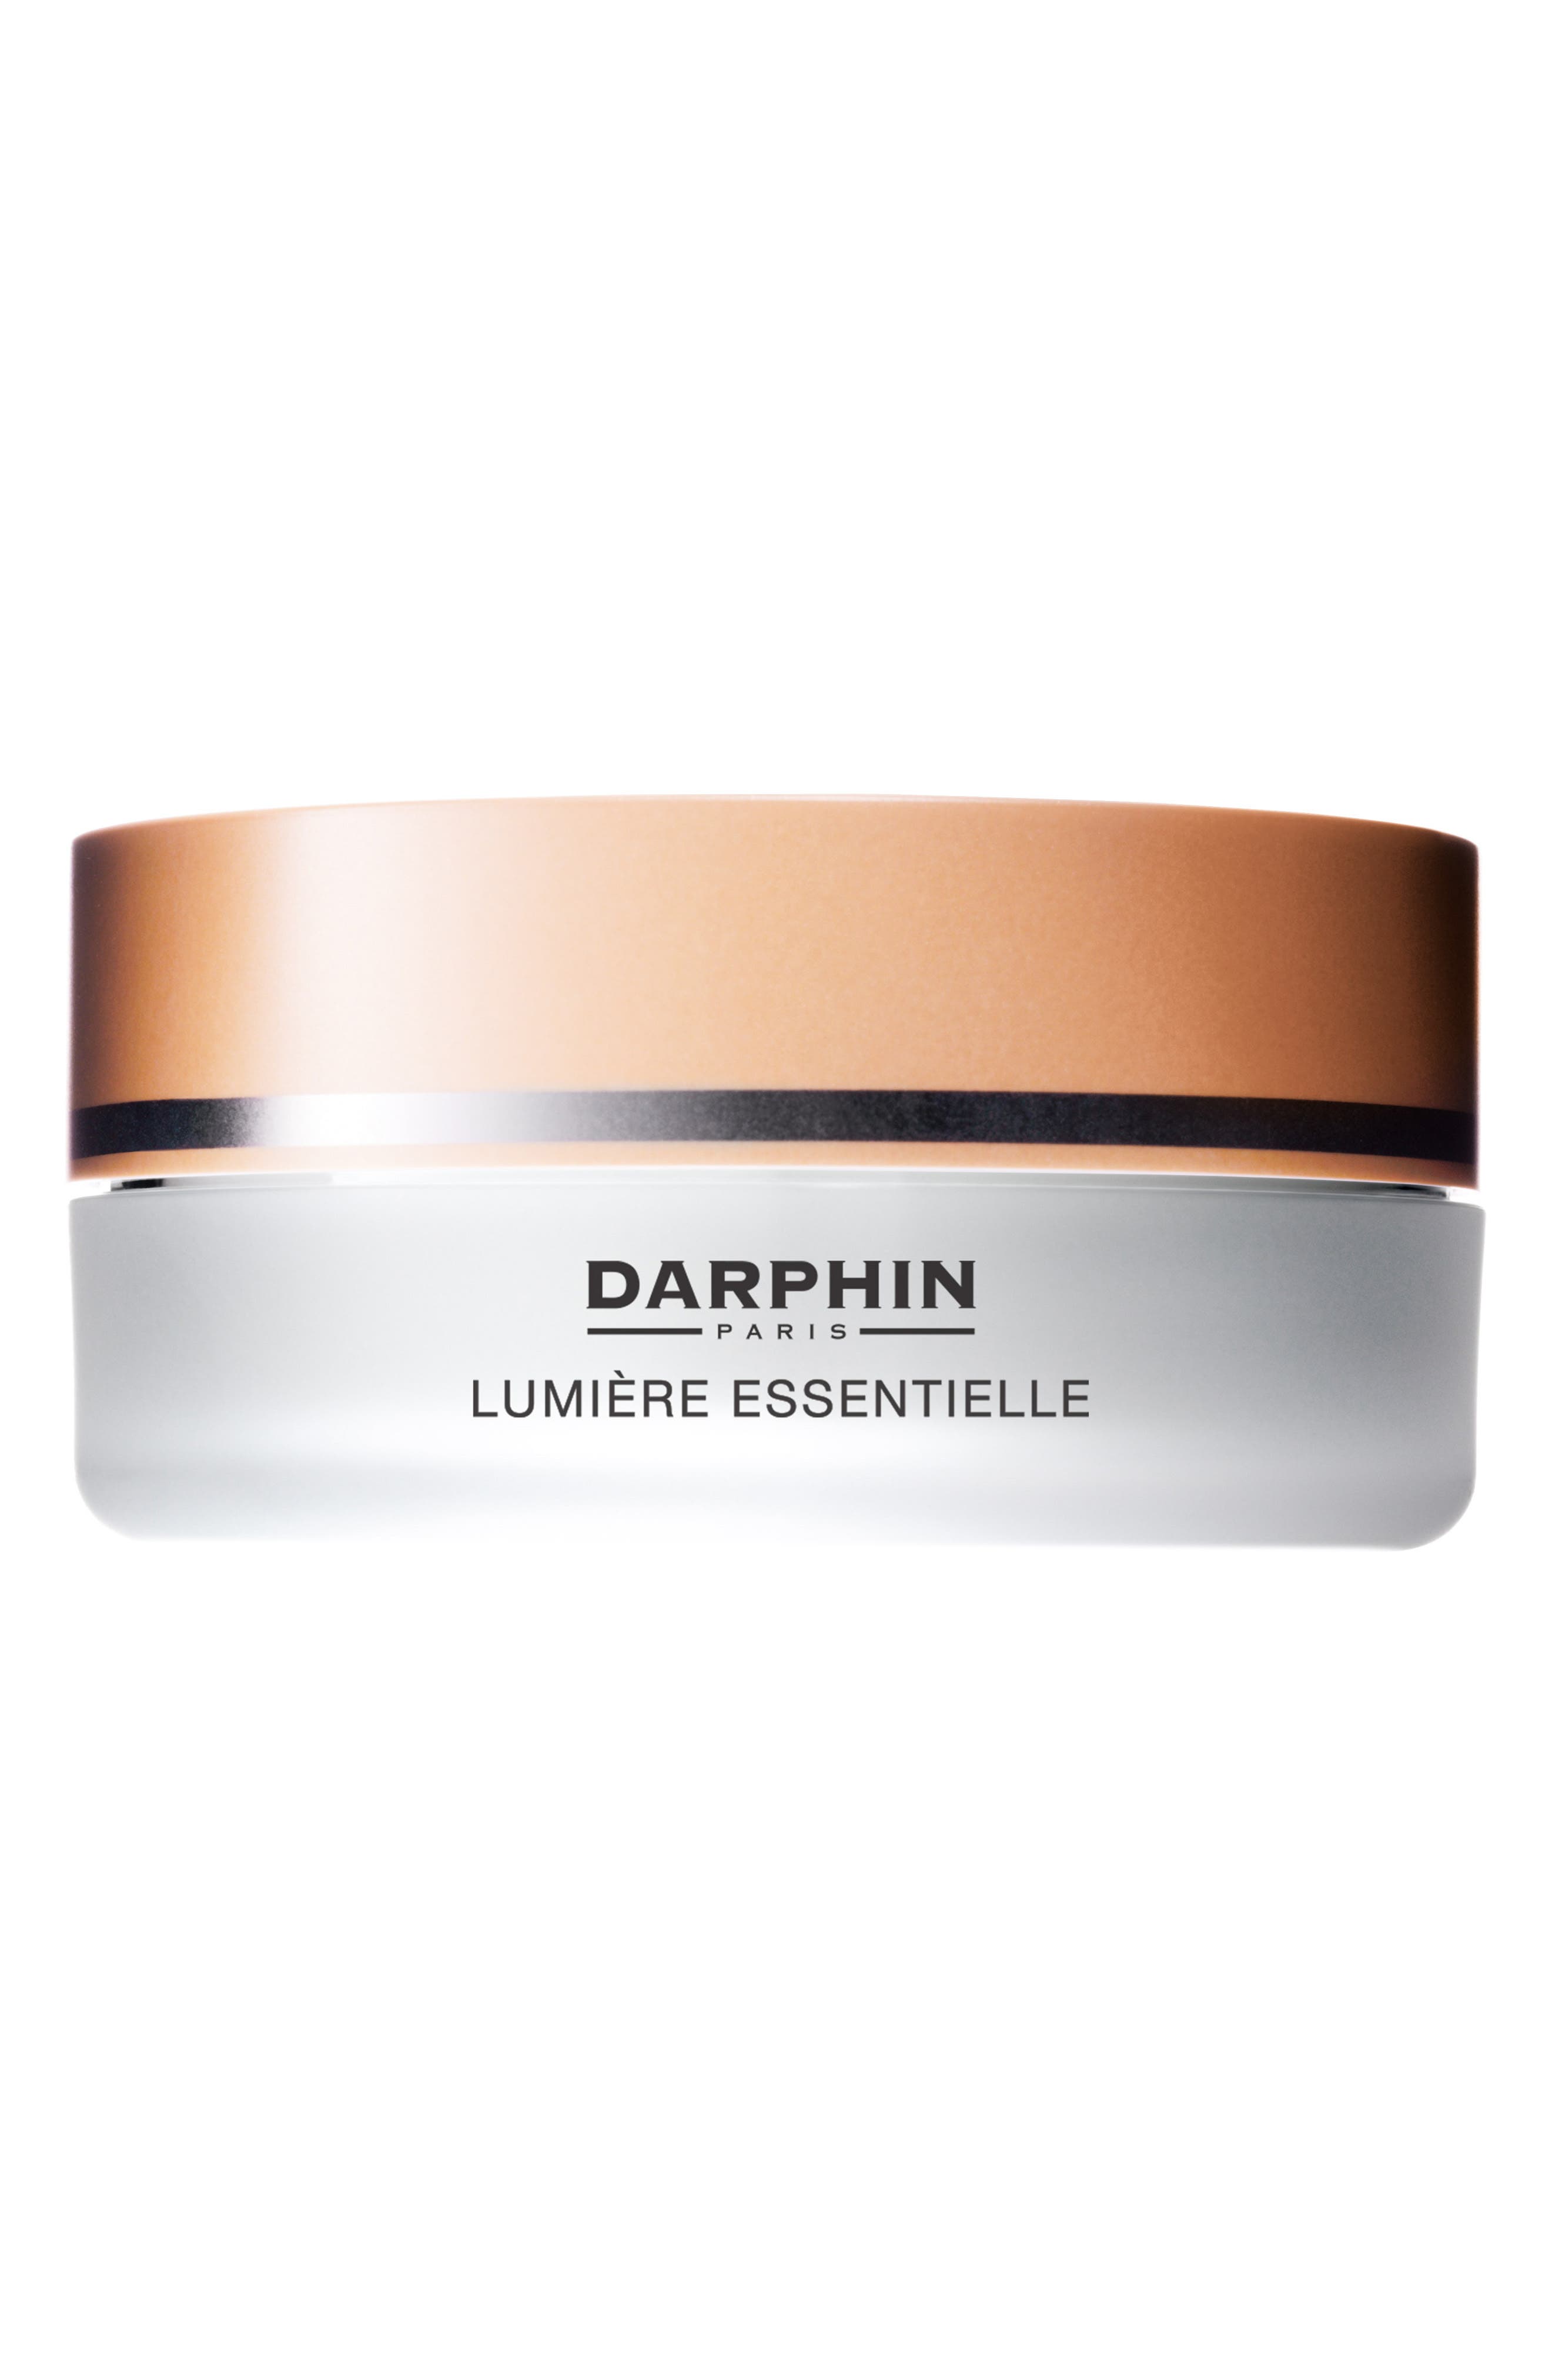 Darphin Lumiere Essentielle Instant Purifying & Illuminating Mask at Nordstrom